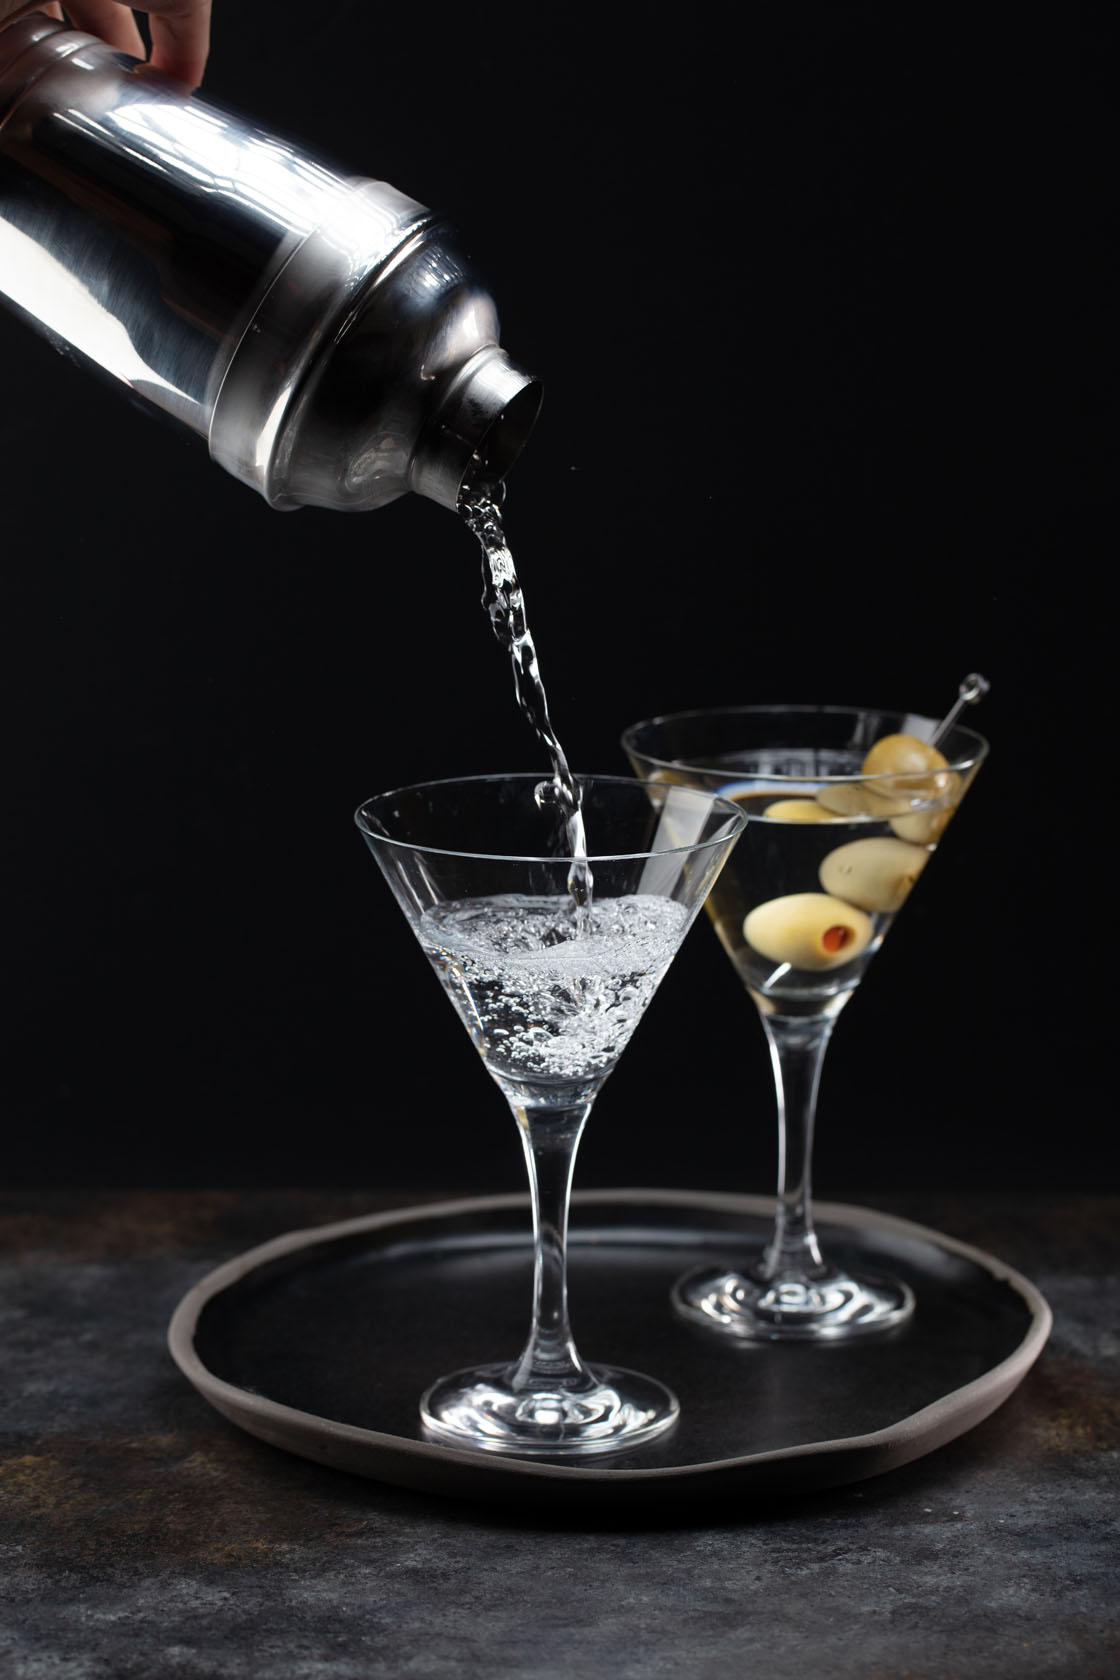 Martini being poured from shaker into two martini glasses